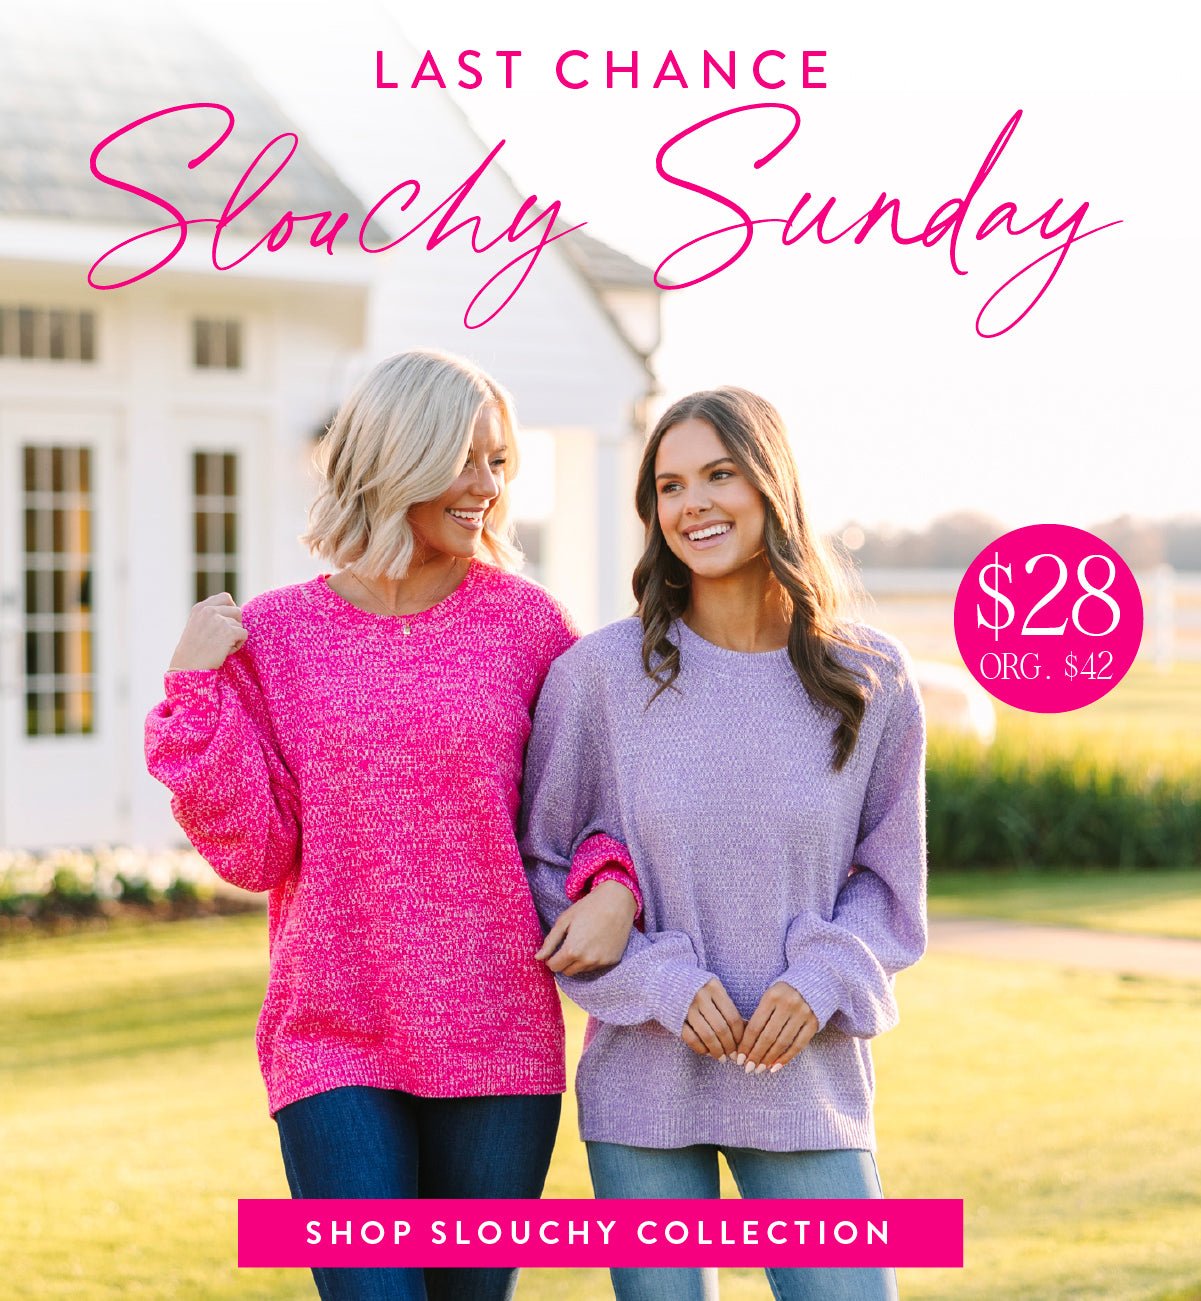 Shop Slouchy Collection